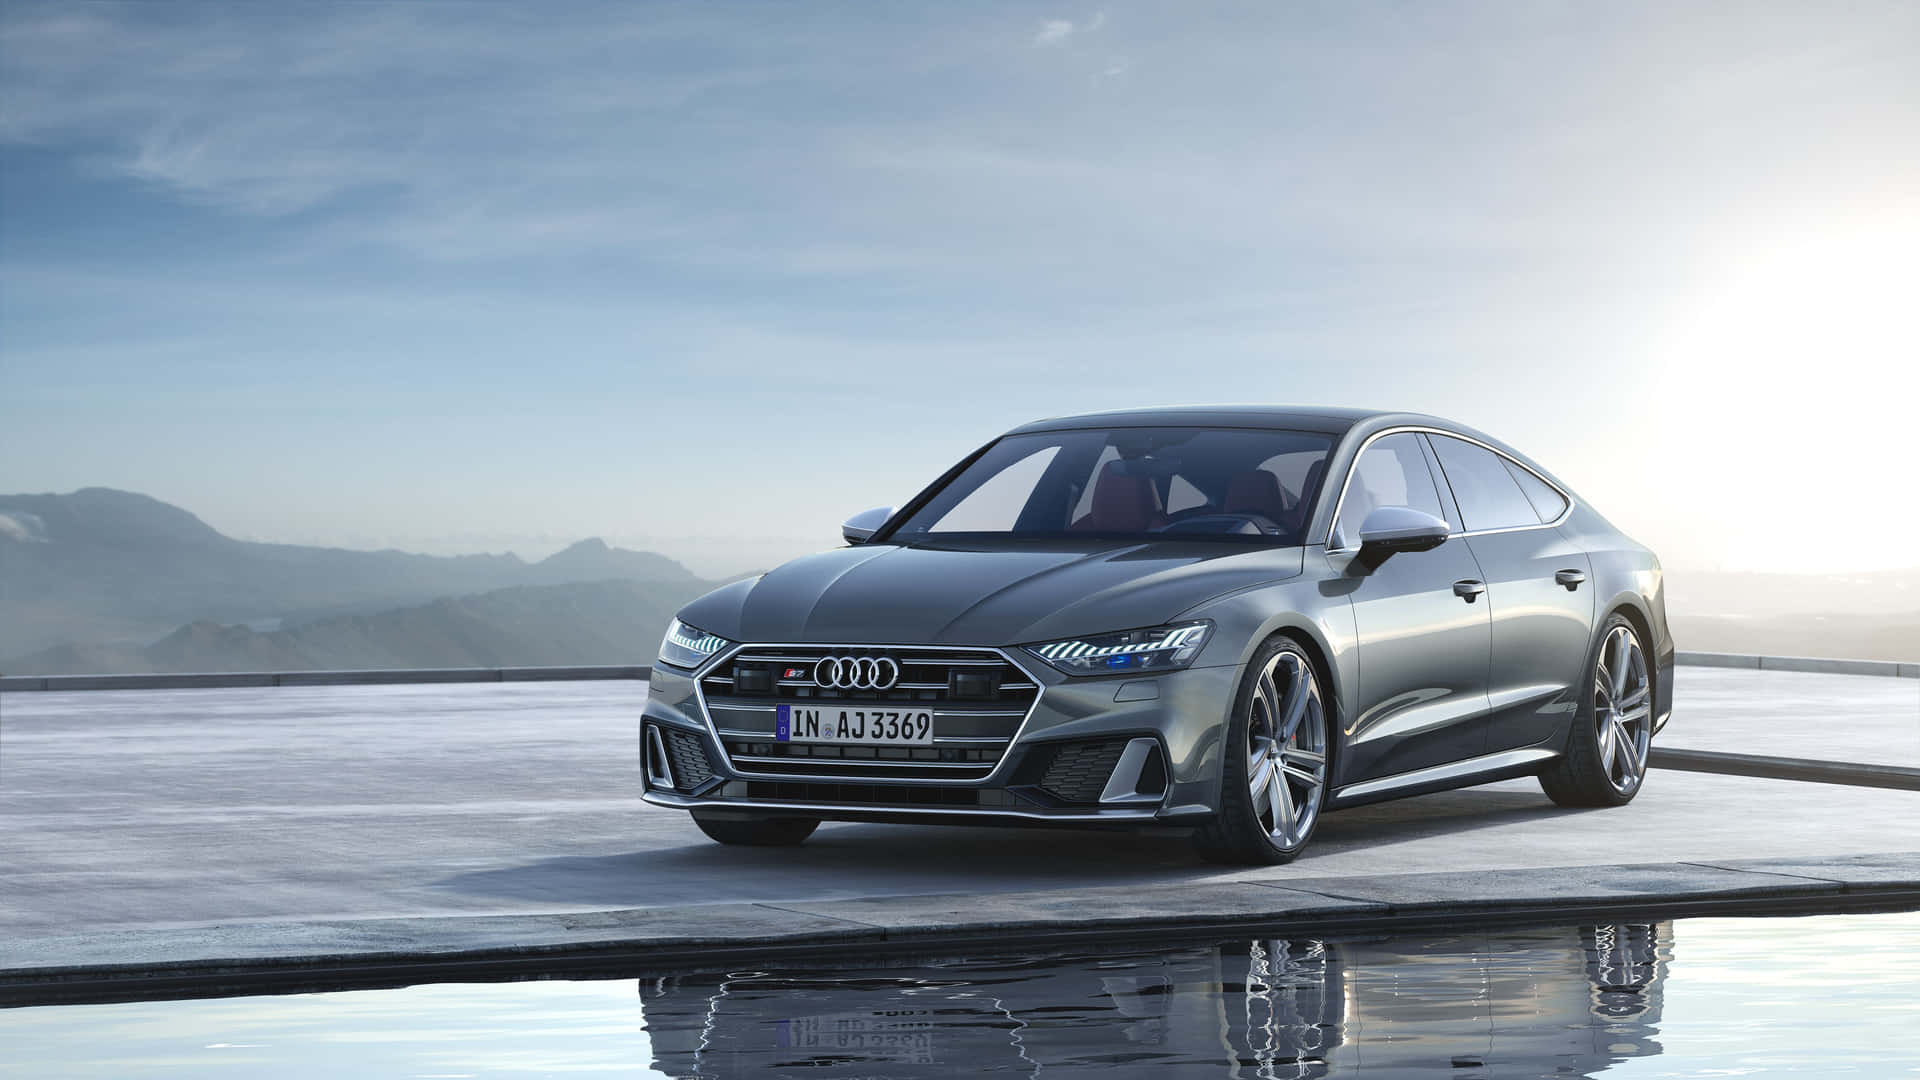 Captivating Audi S7 in its Prime Wallpaper